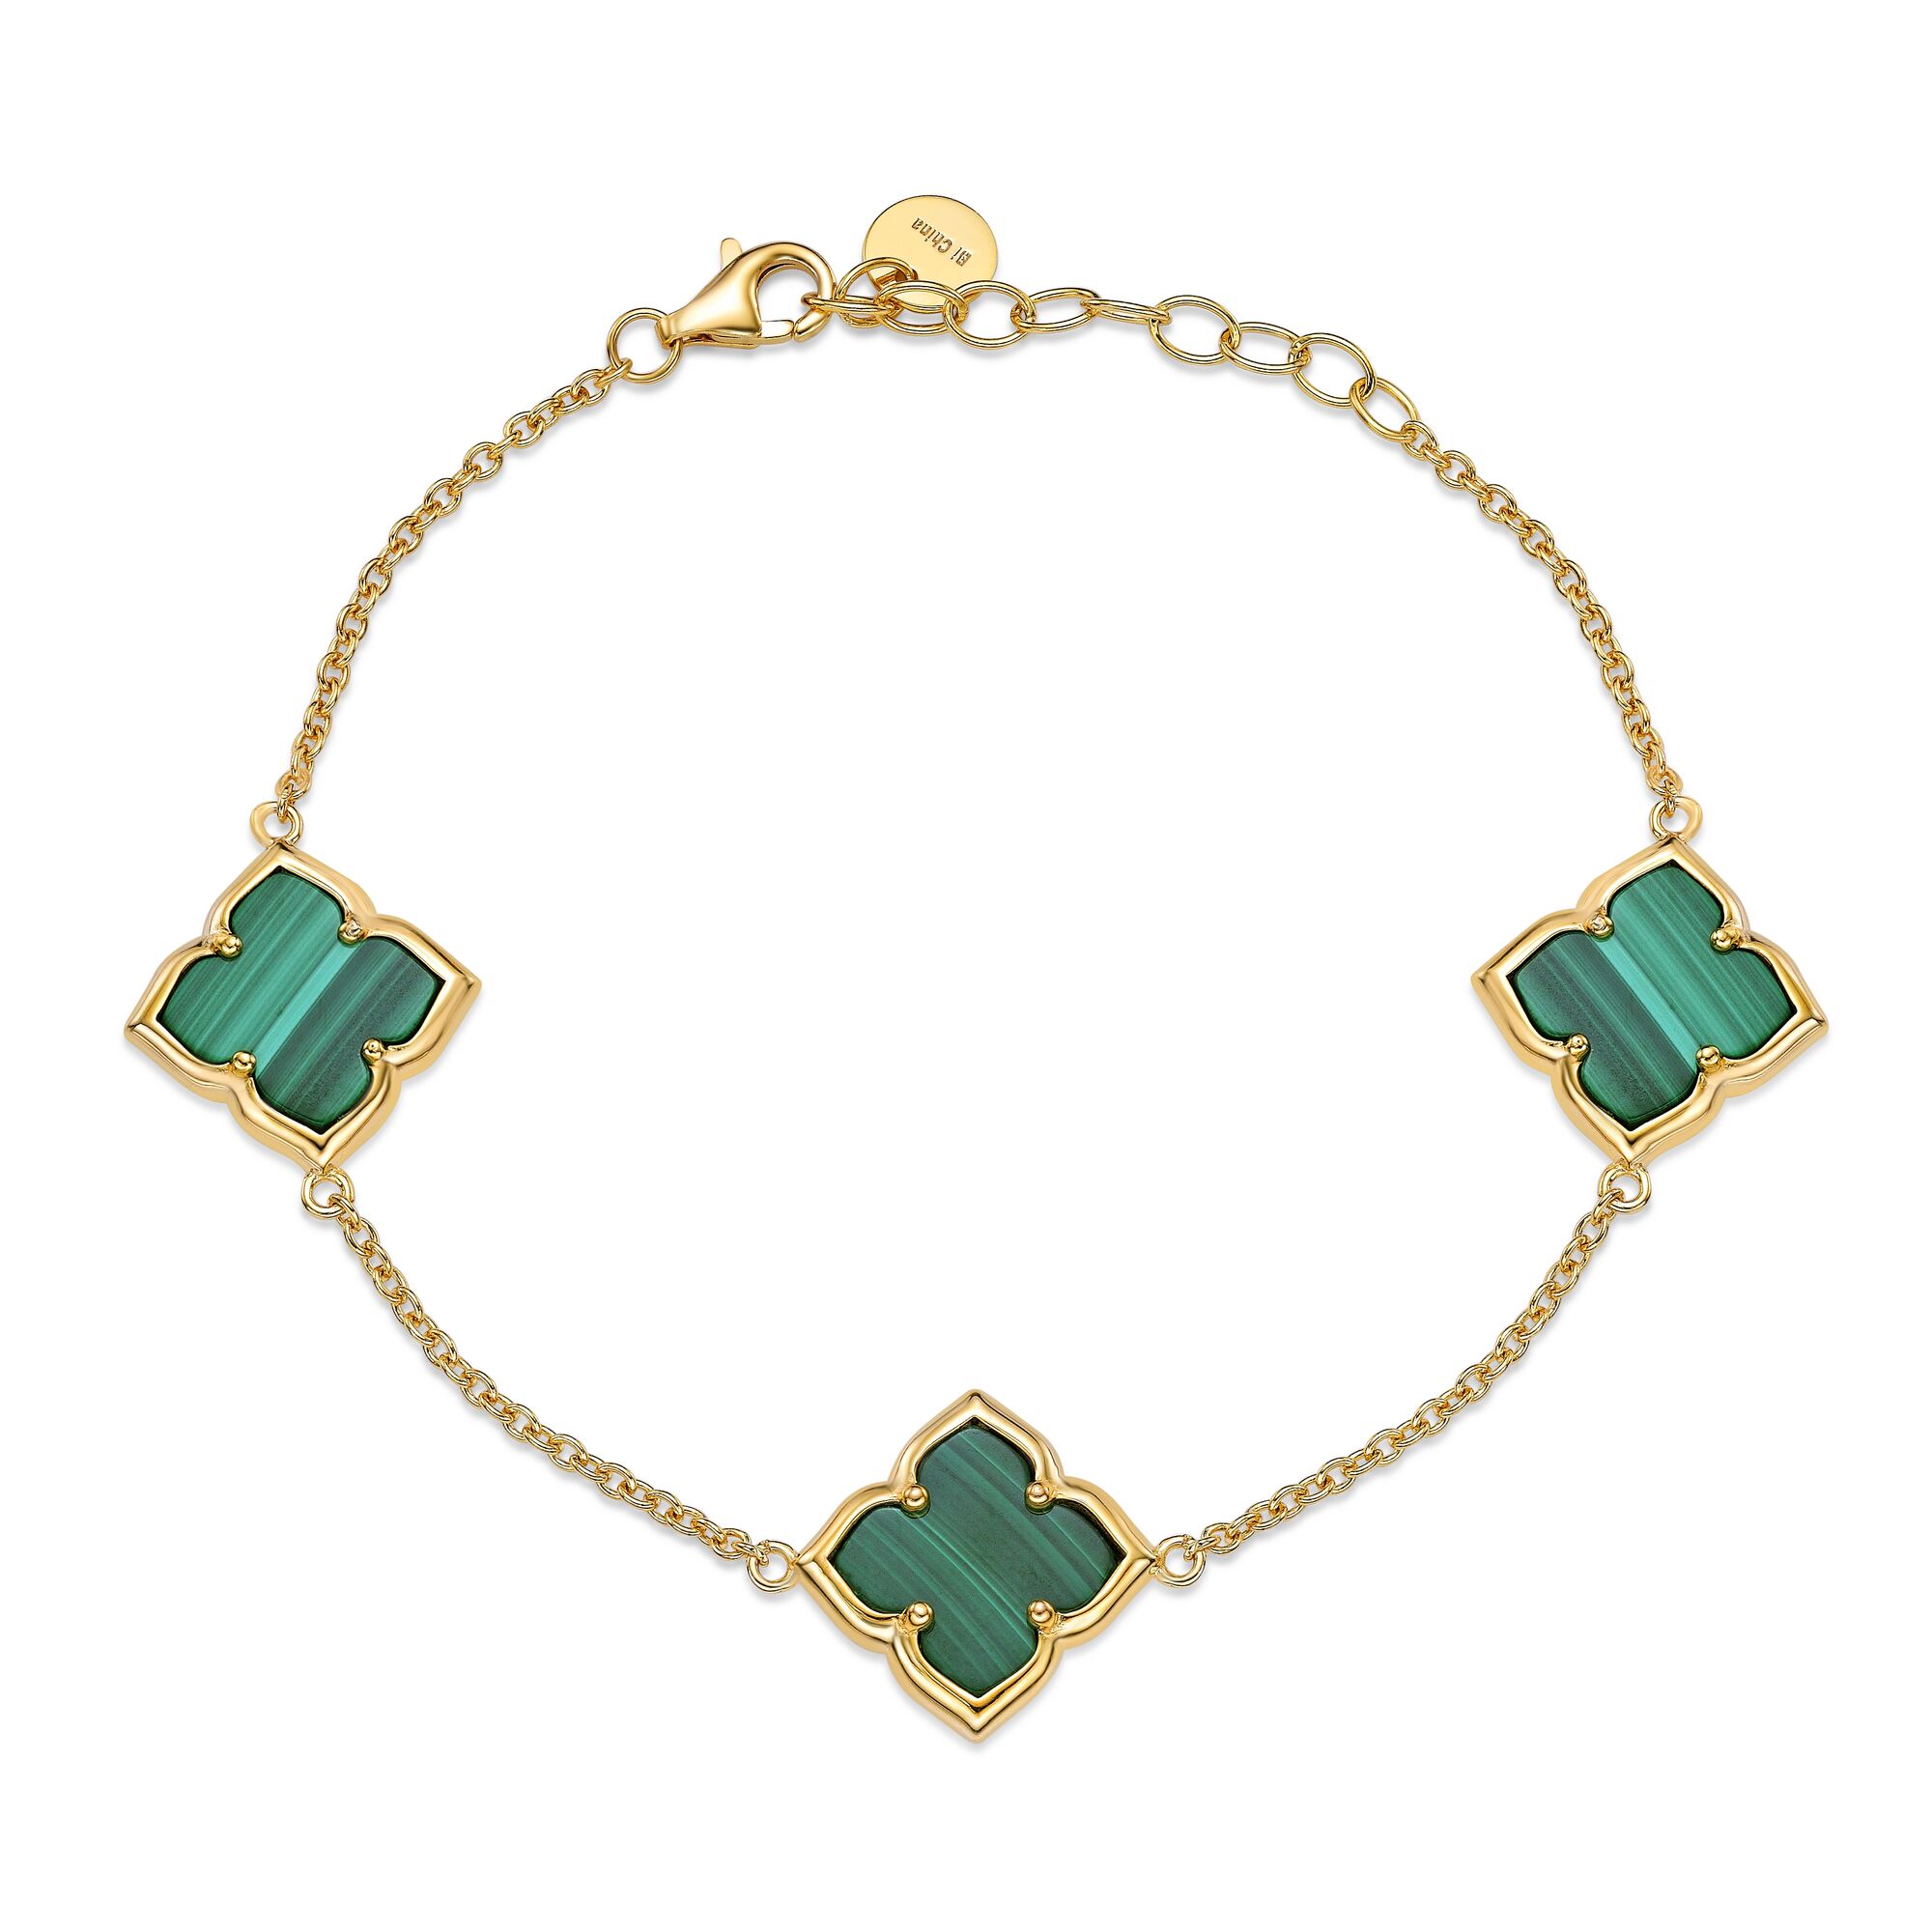 Lavari Jewelers Women’s Malachite 3 Clover Bracelet with Lobster Clasp, 925 Sterling Silver, 7-8 Inches